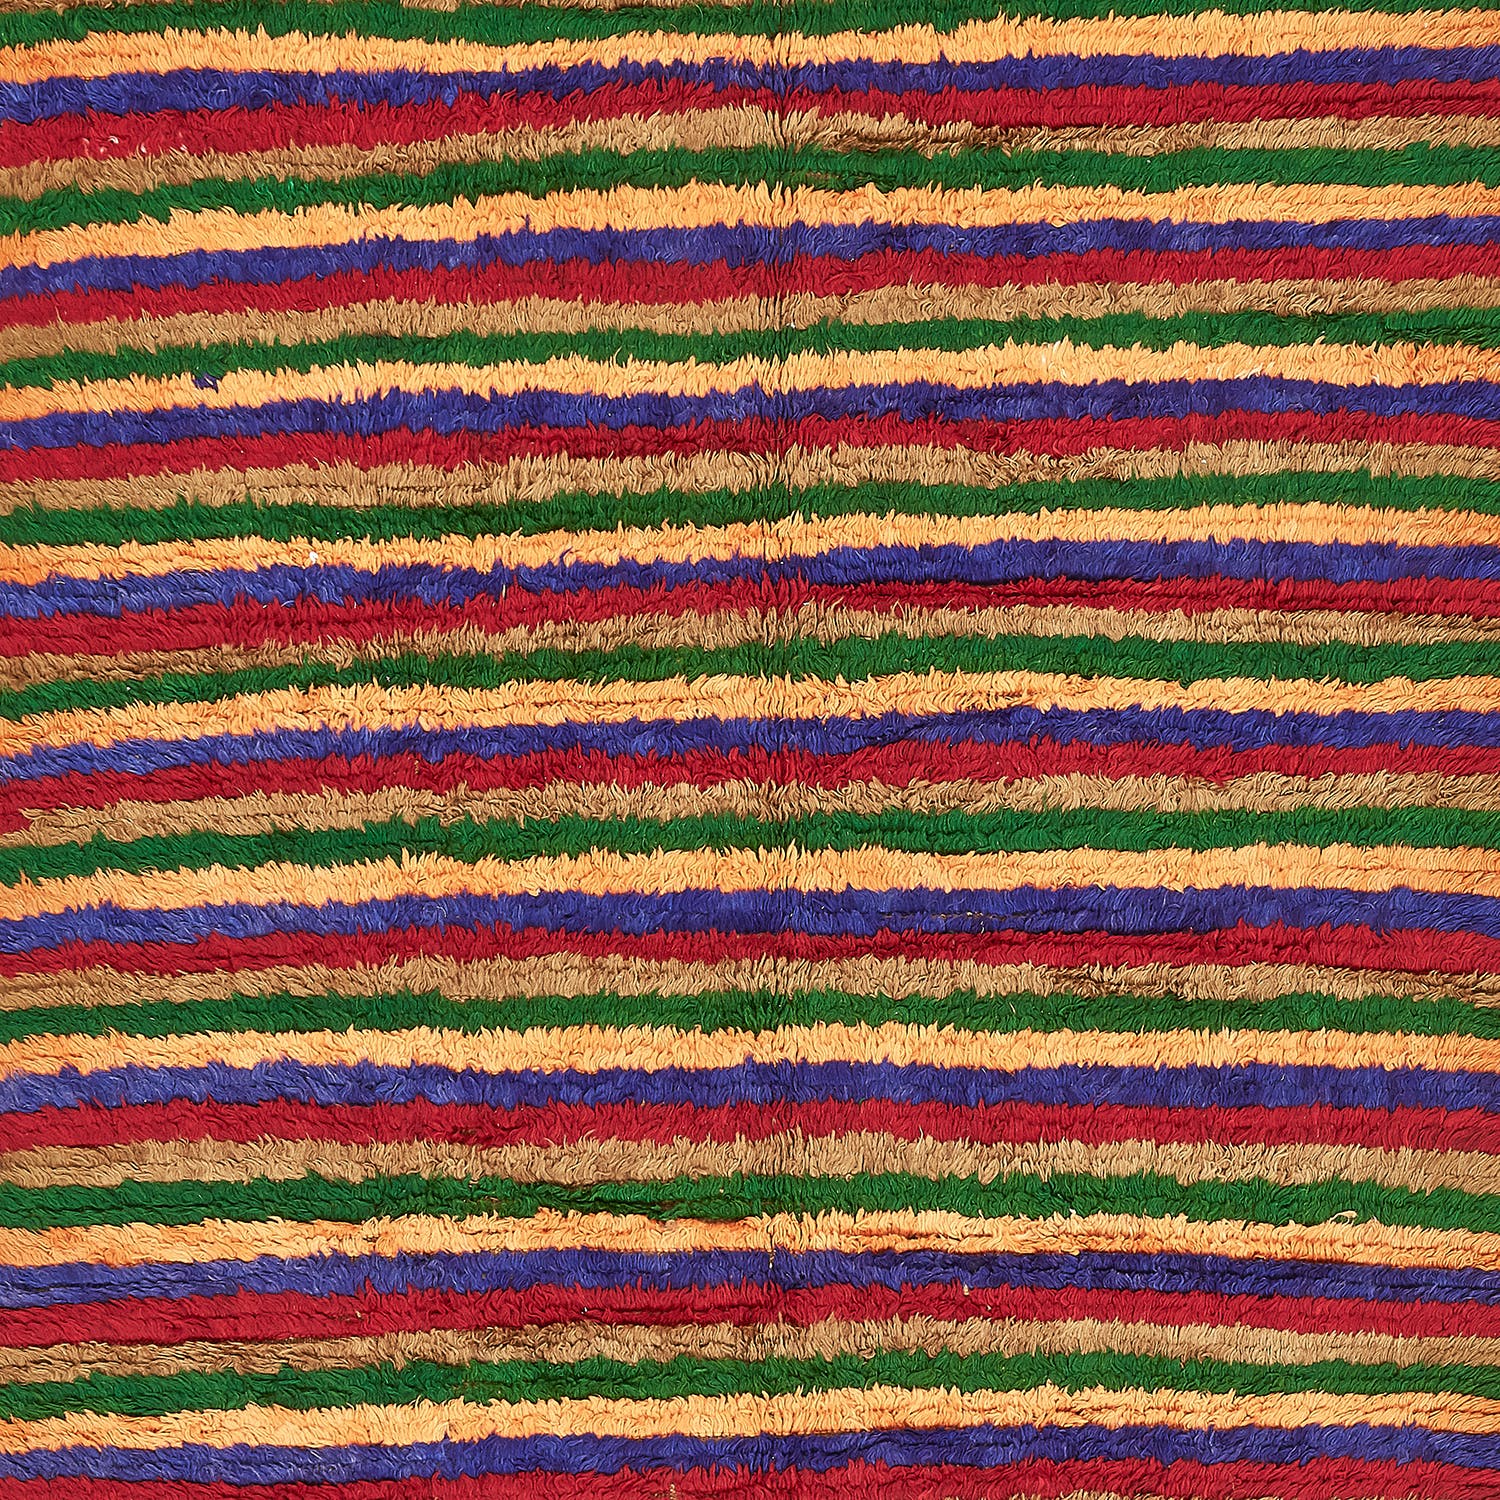 Vibrant and textured surface showcasing a rhythmic pattern of colorful stripes.